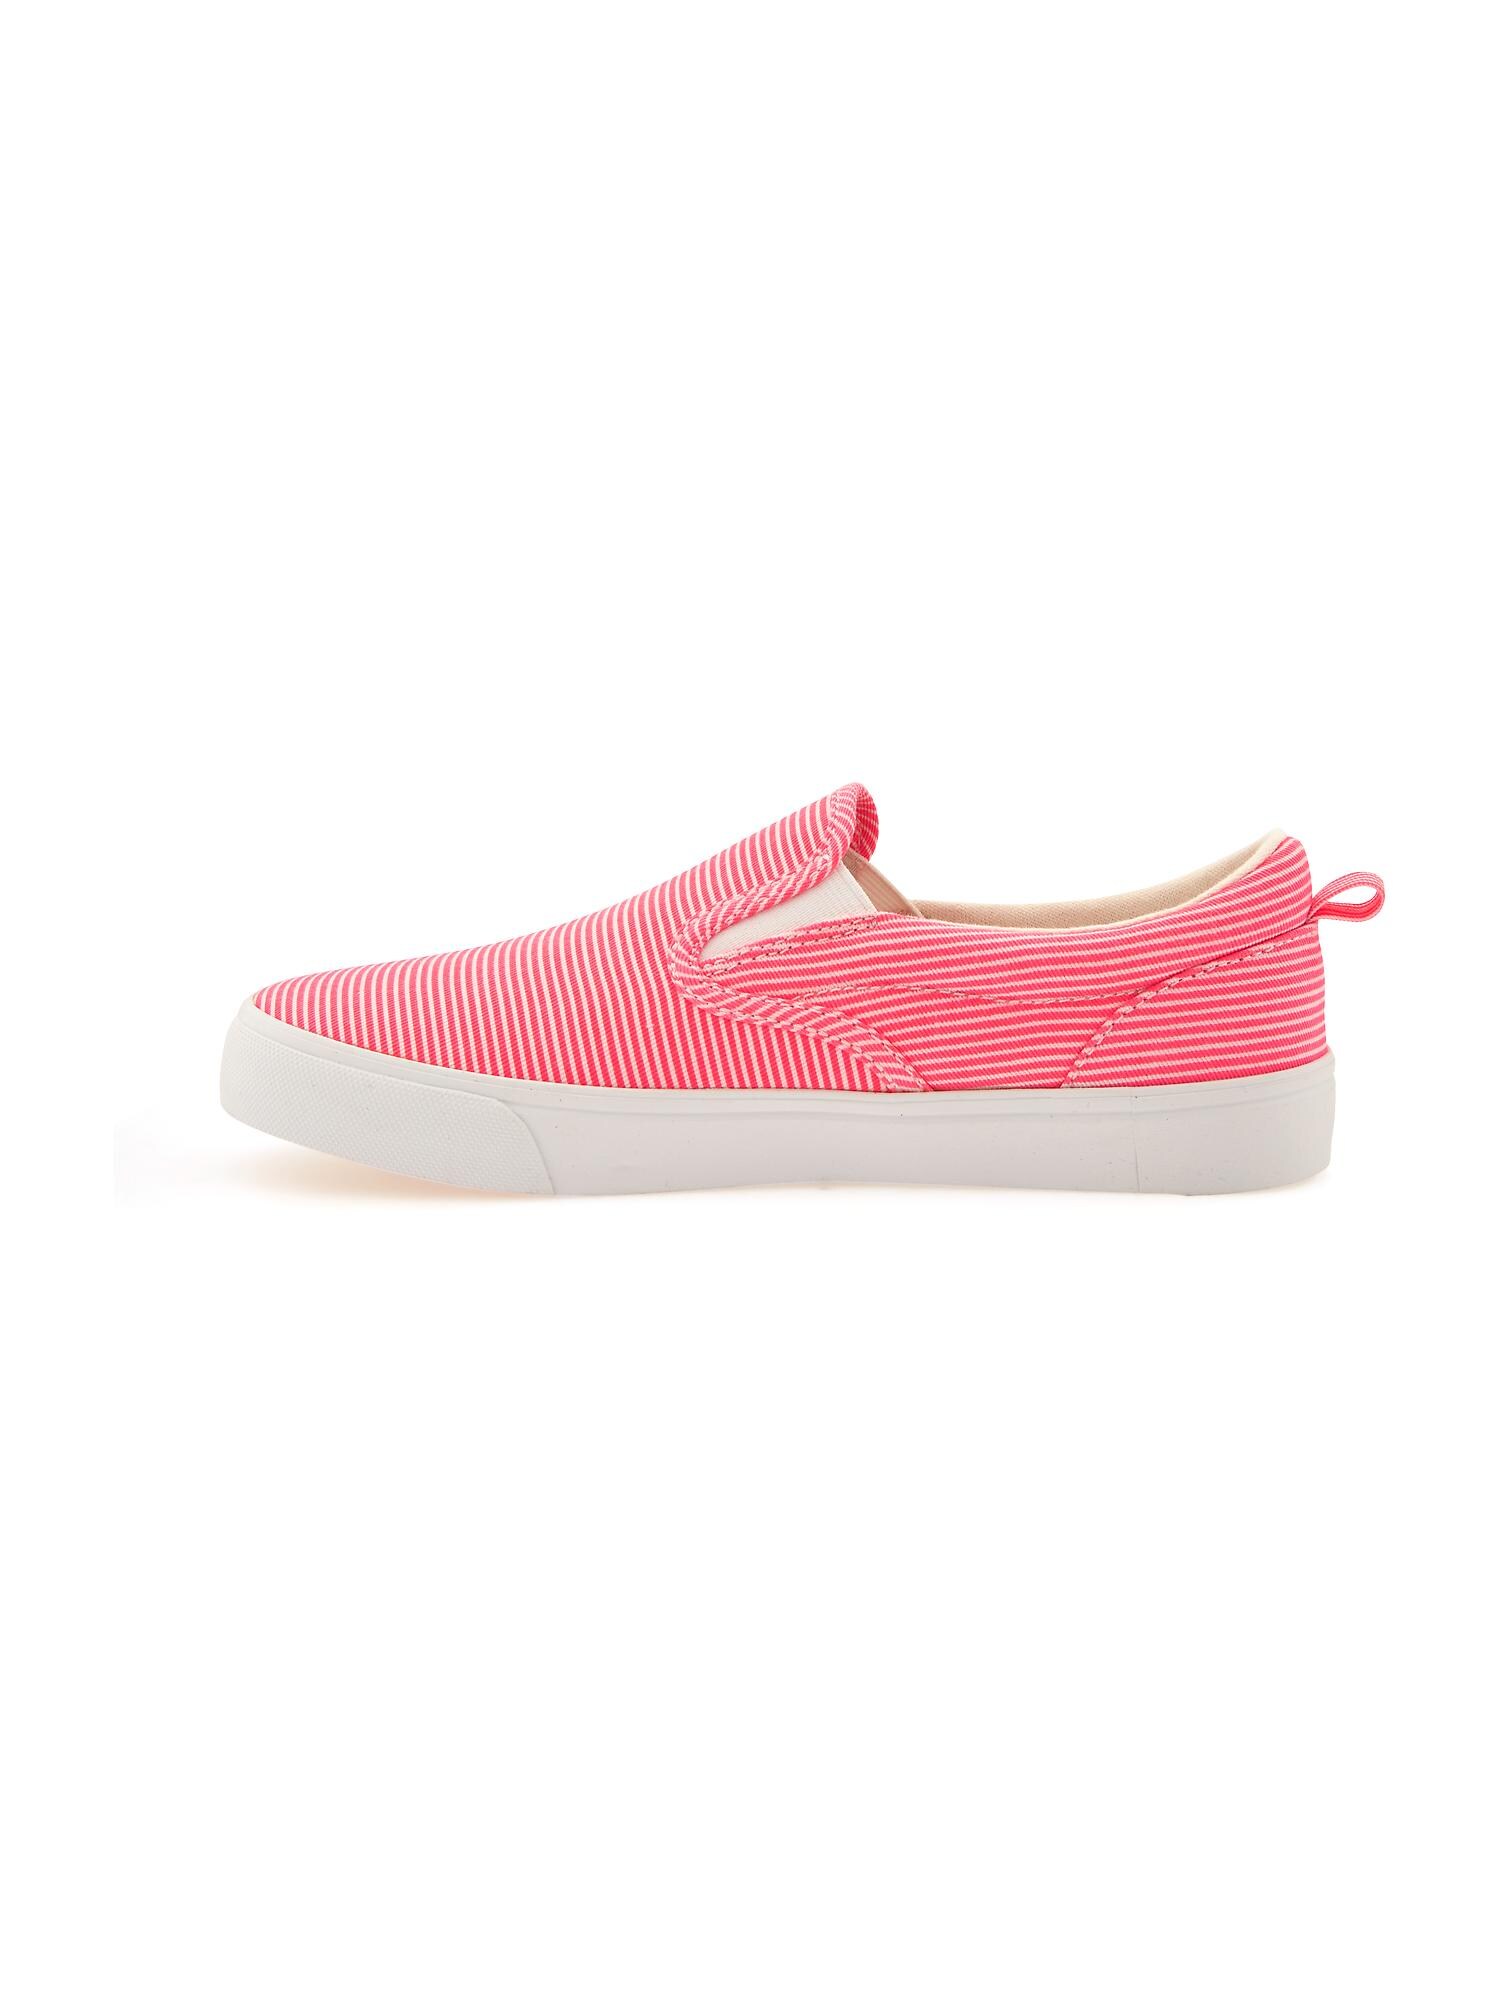 Striped Slip-On Sneakers for Girls | Old Navy